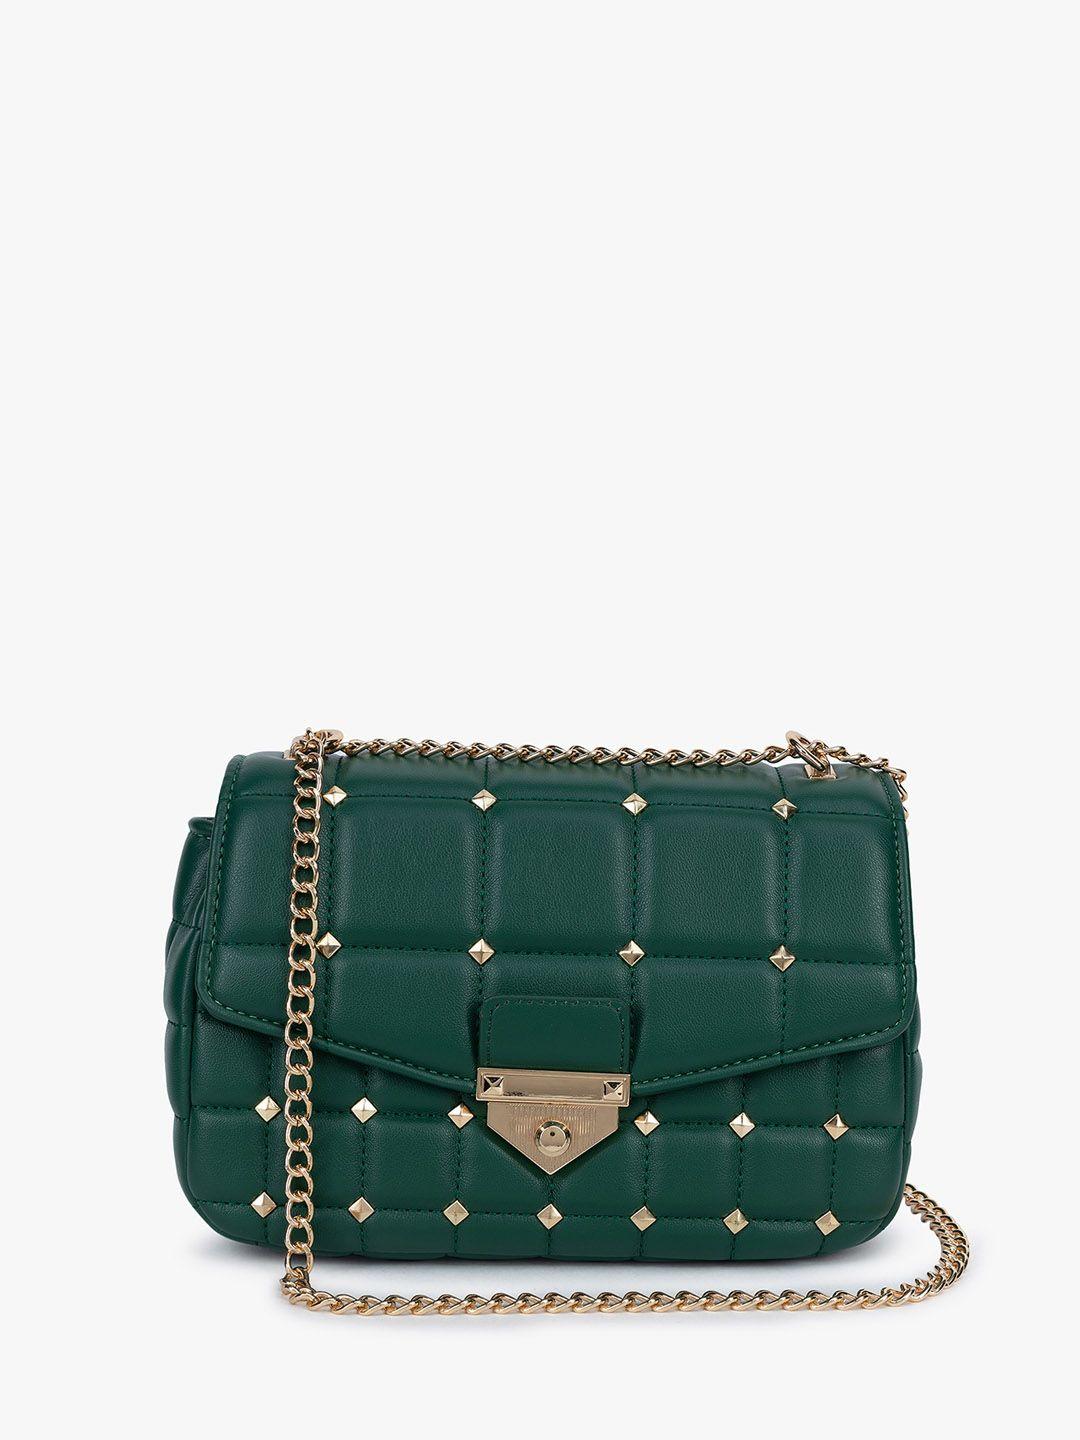 kazo green pu structured sling bag with quilted